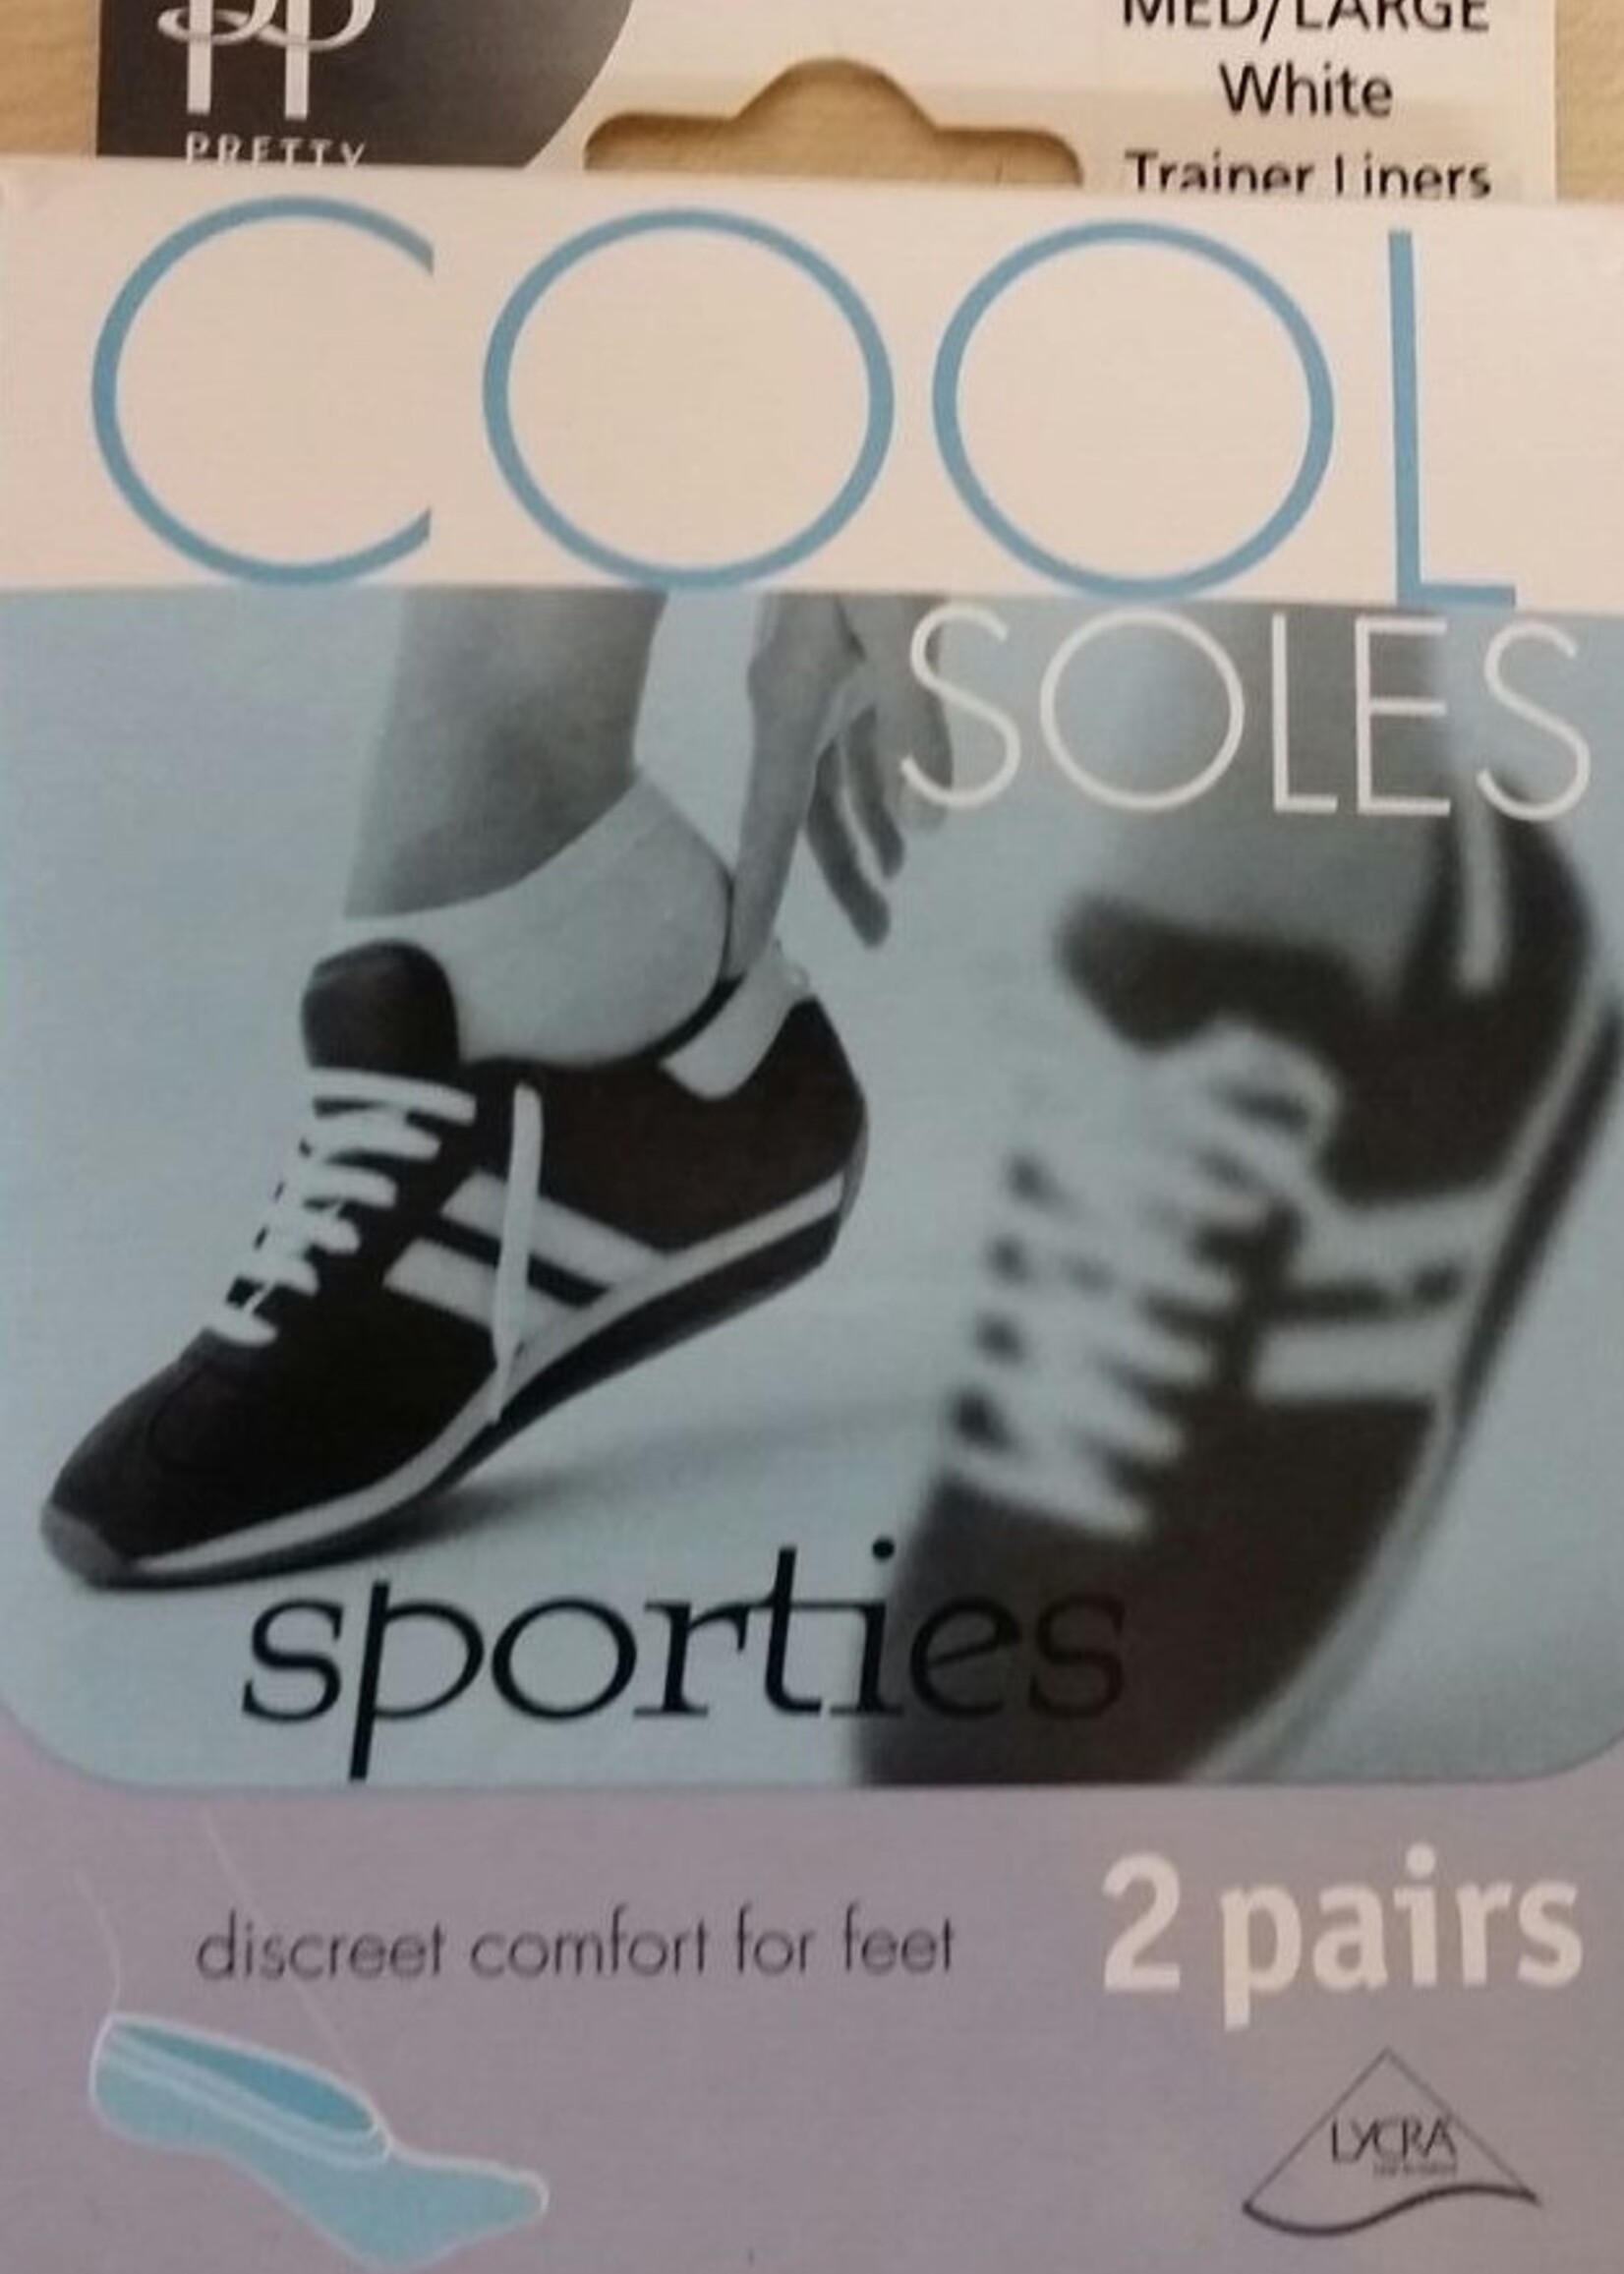 Pretty Polly  Pretty Polly Cool Soles sporties training liners (2 paar)